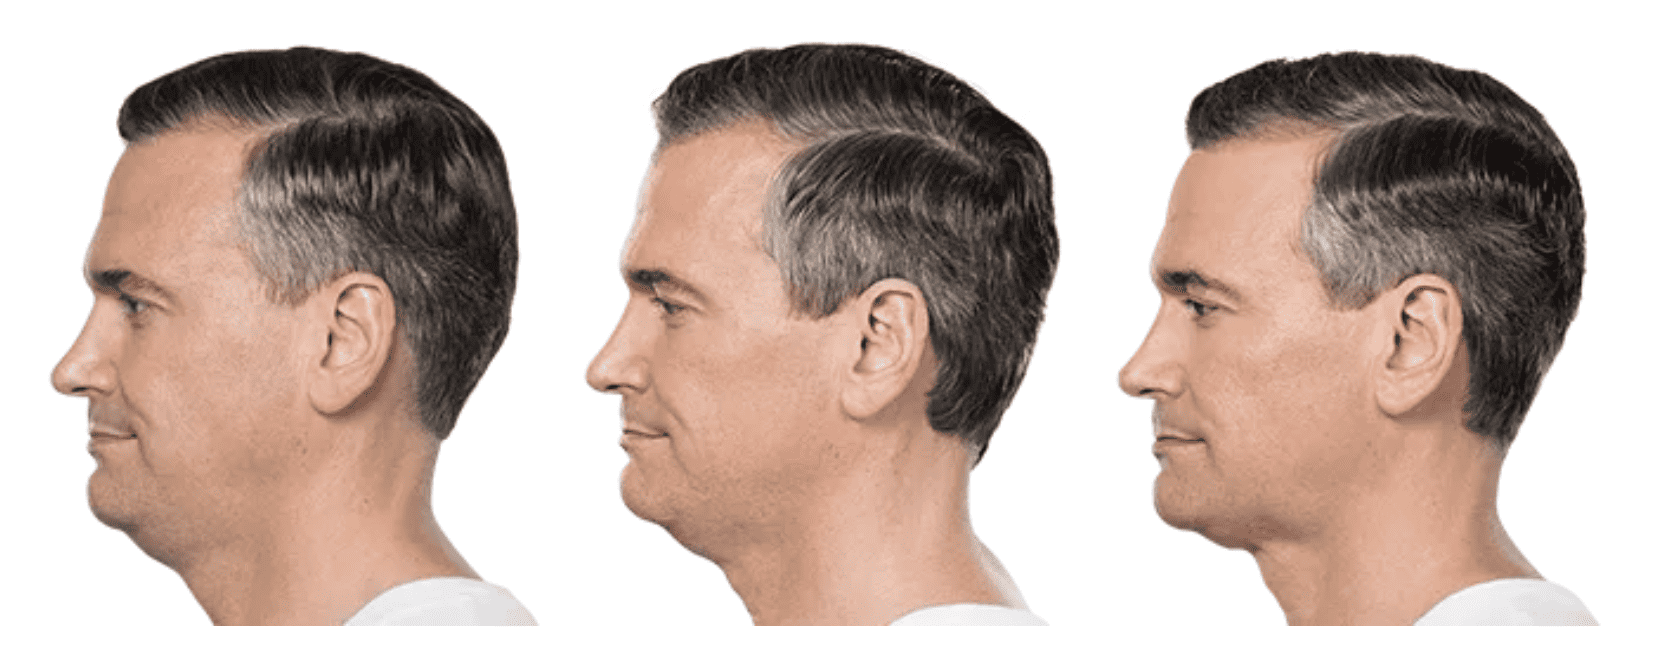 Before and after photos of Kybella treatments.